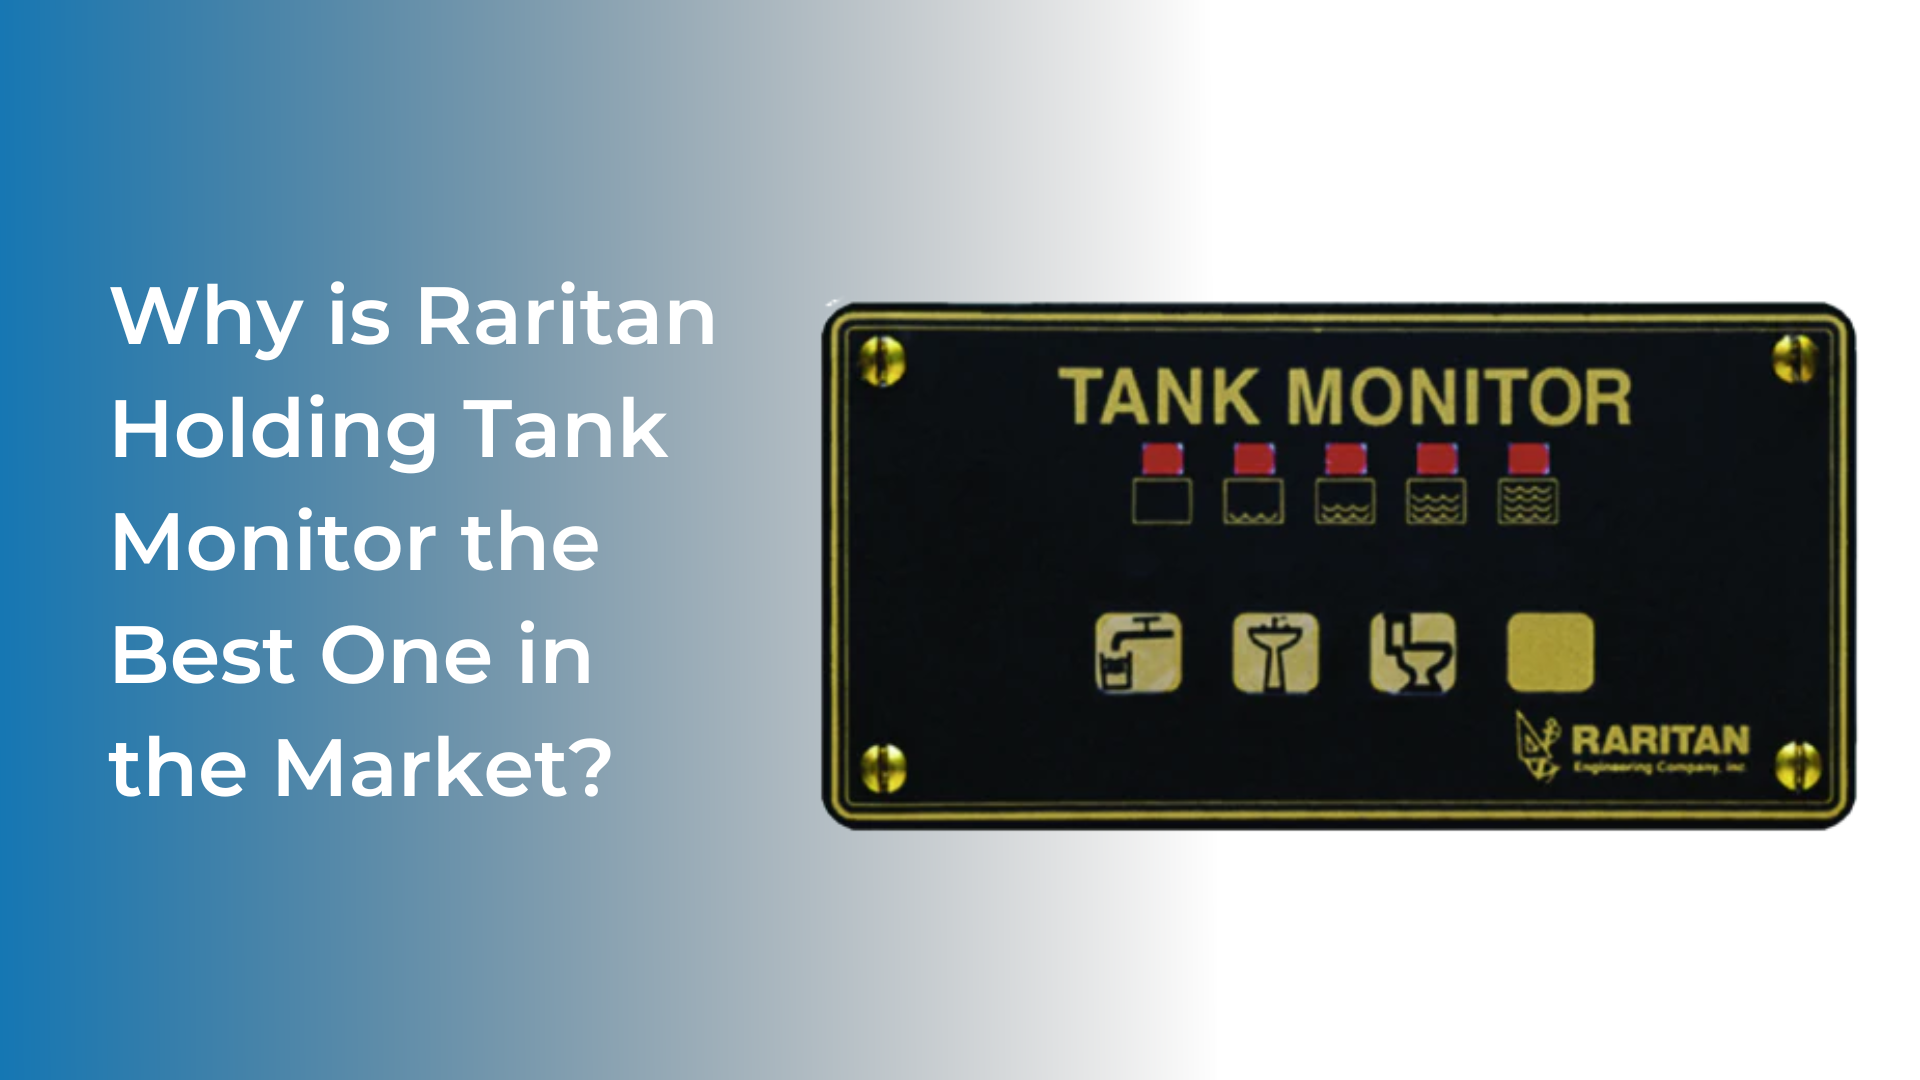 Why is Raritan Holding Tank Monitor the Best One in the Market?